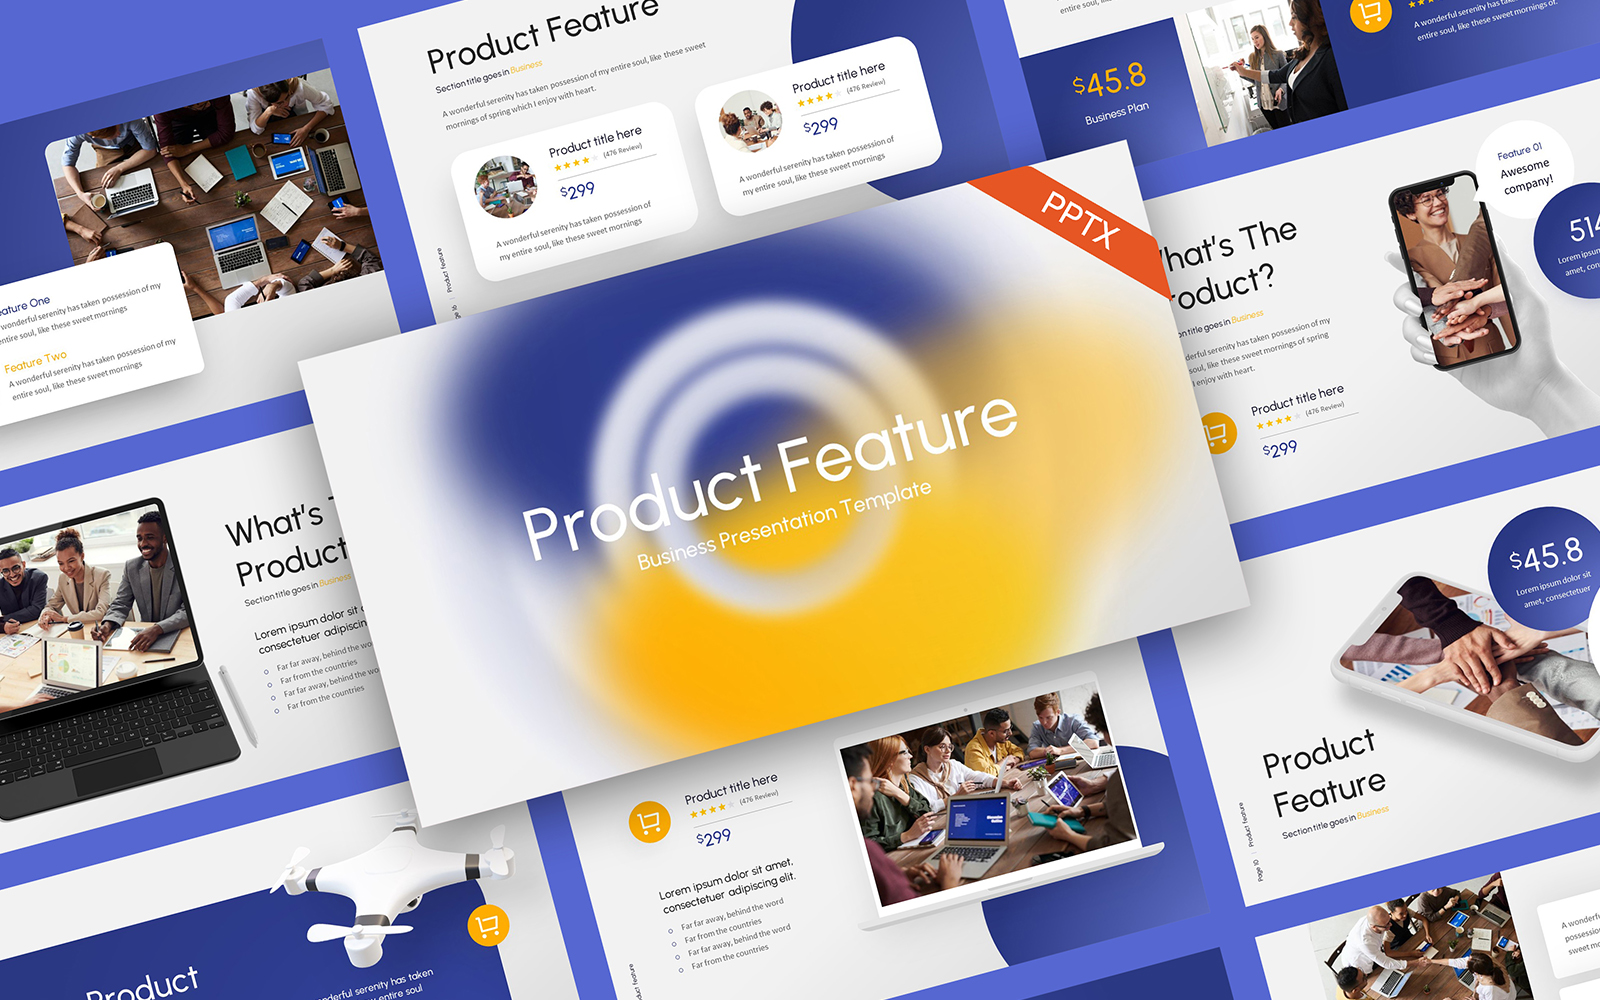 Product Feature Professional PowerPoint Template